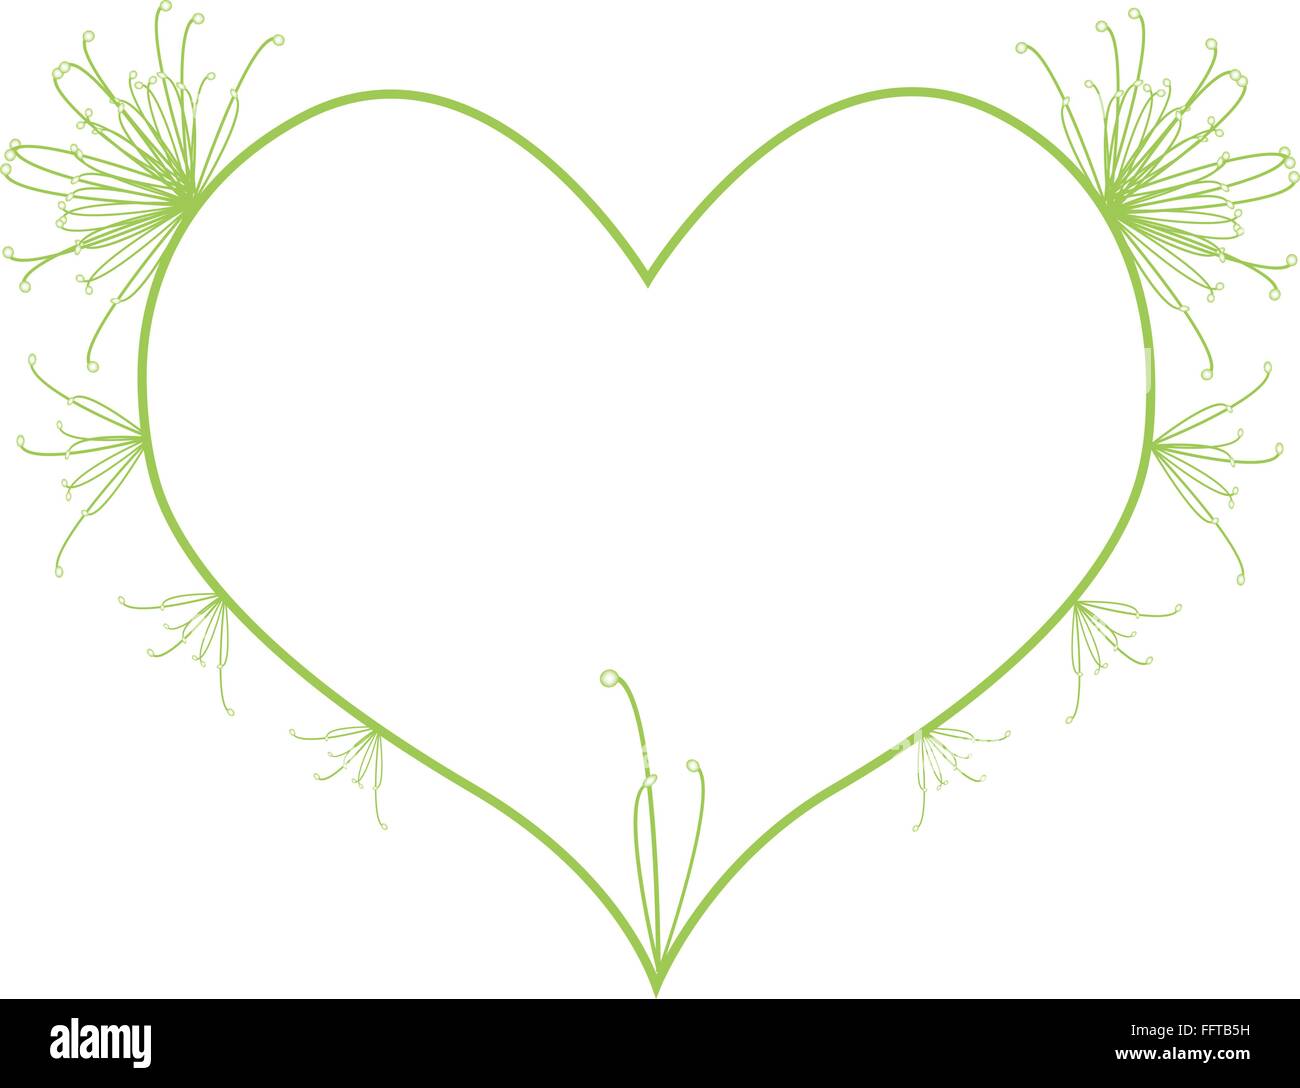 Love Concept, Illustration of Green Egyptian Cyperus Papyrus or Cyperaceae Leaves Forming in Heart Shape Isolated on White Backg Stock Vector